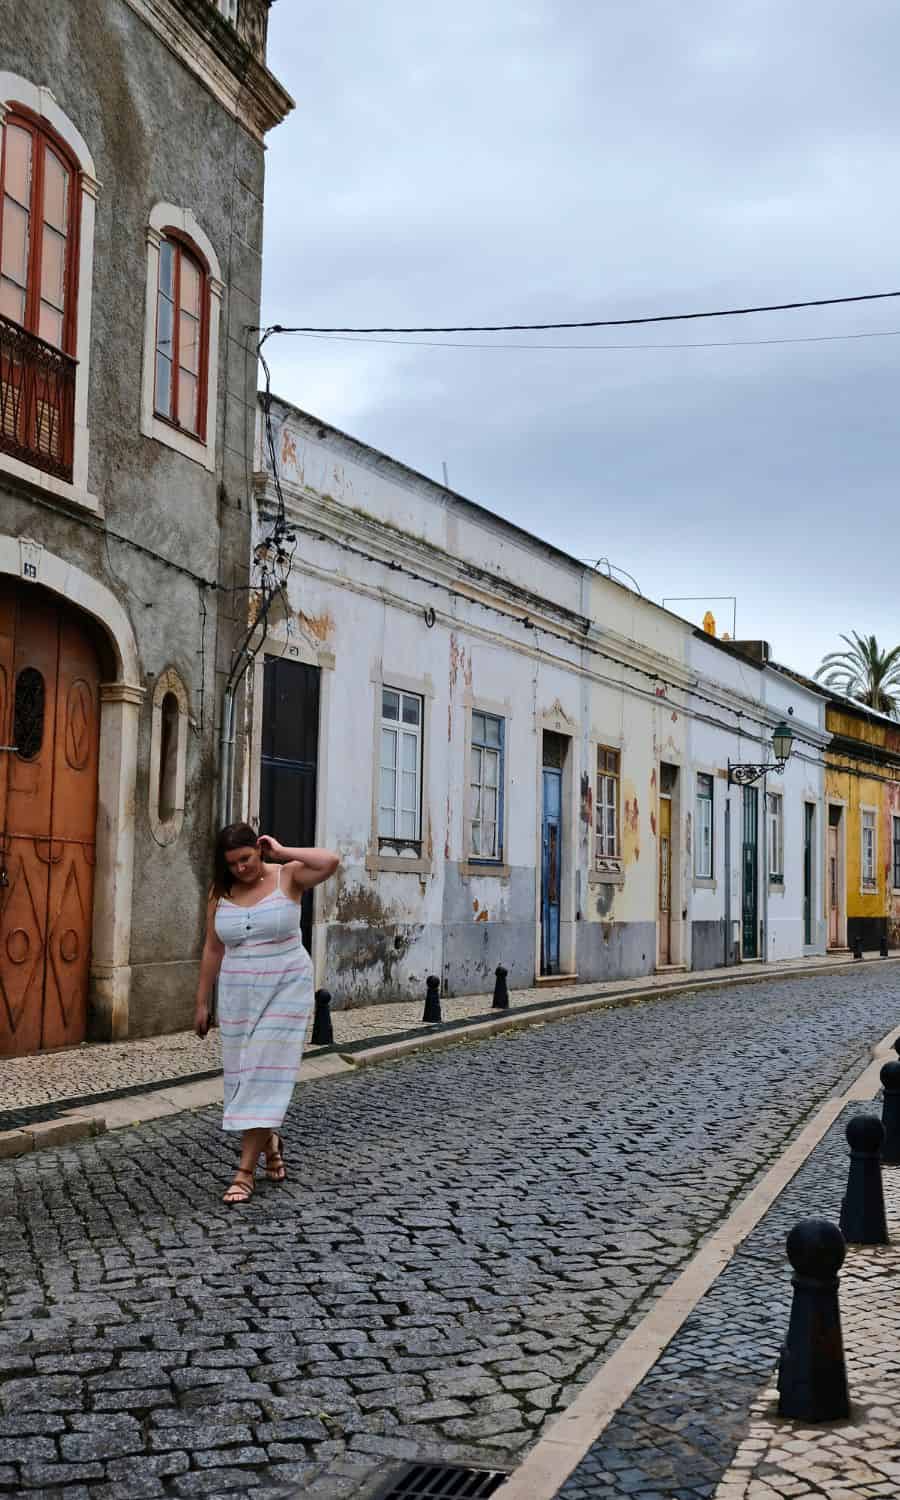 Woman solo traveler touching her hair while exploring the rustic charm of Faro's weathered buildings and cobbled streets, encapsulating the serene atmosphere of the city.